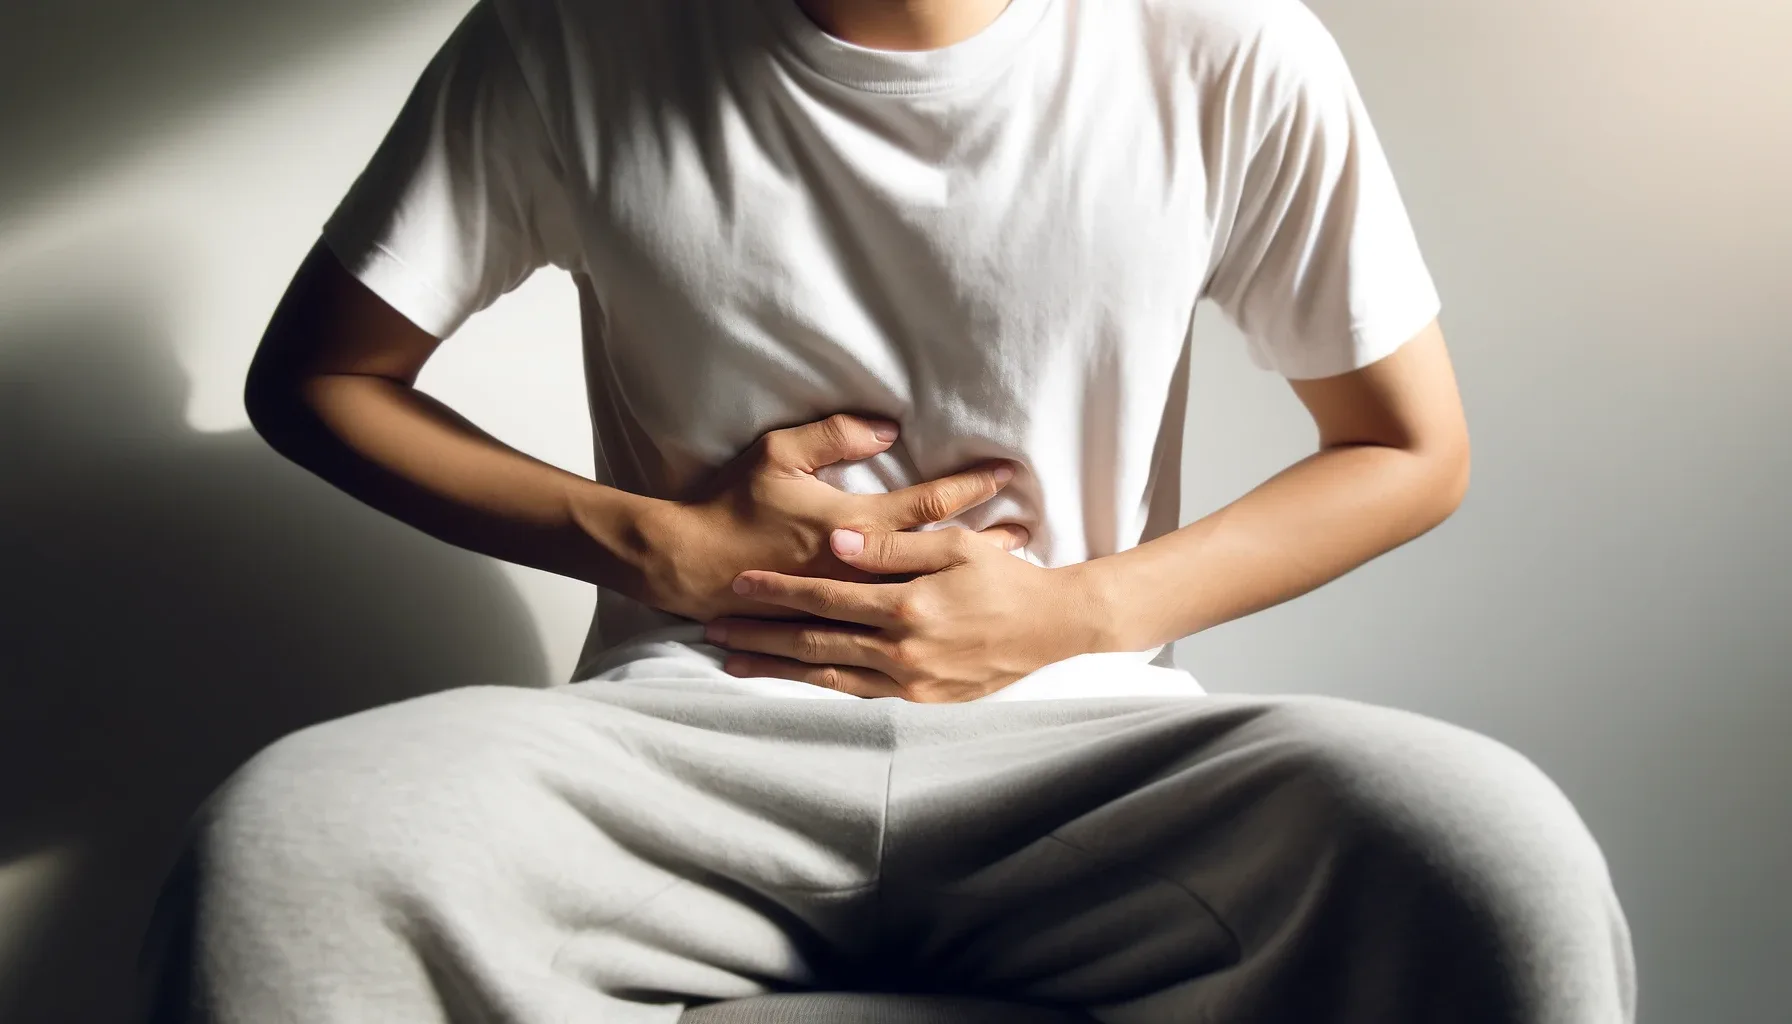 An image of a male sitting down and holding his stomach. He has IBS.